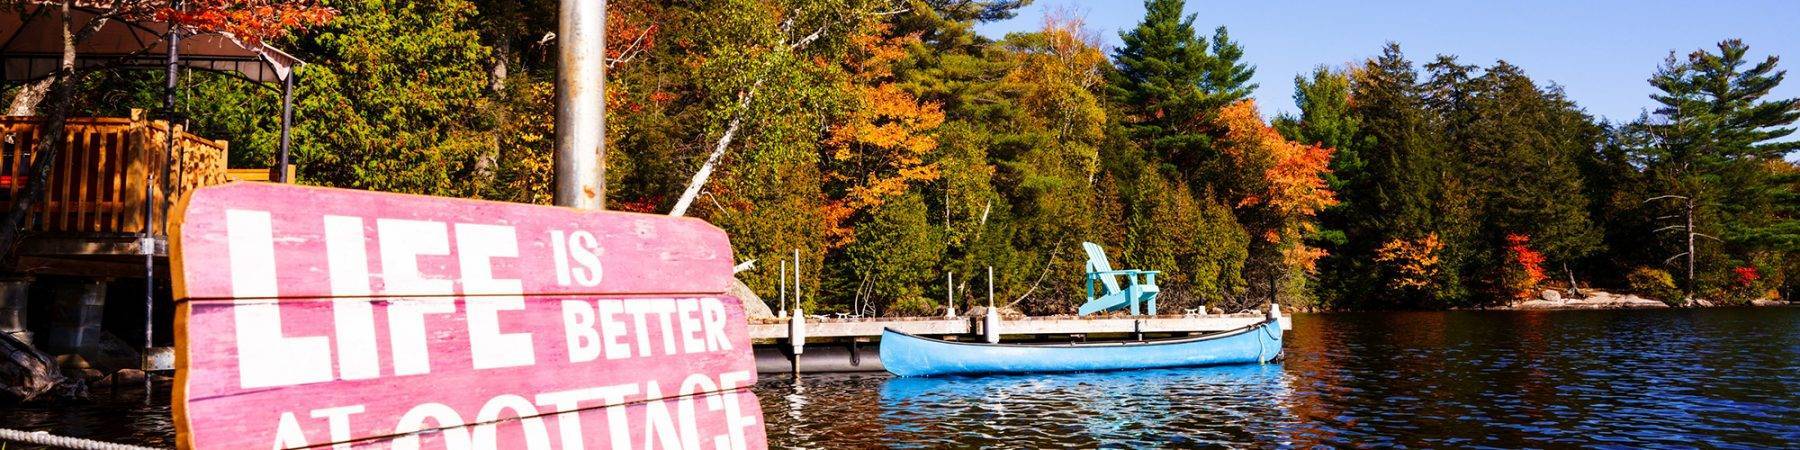 Cottage country real estate is skyrocketing. But there’s still an easy way to get there.